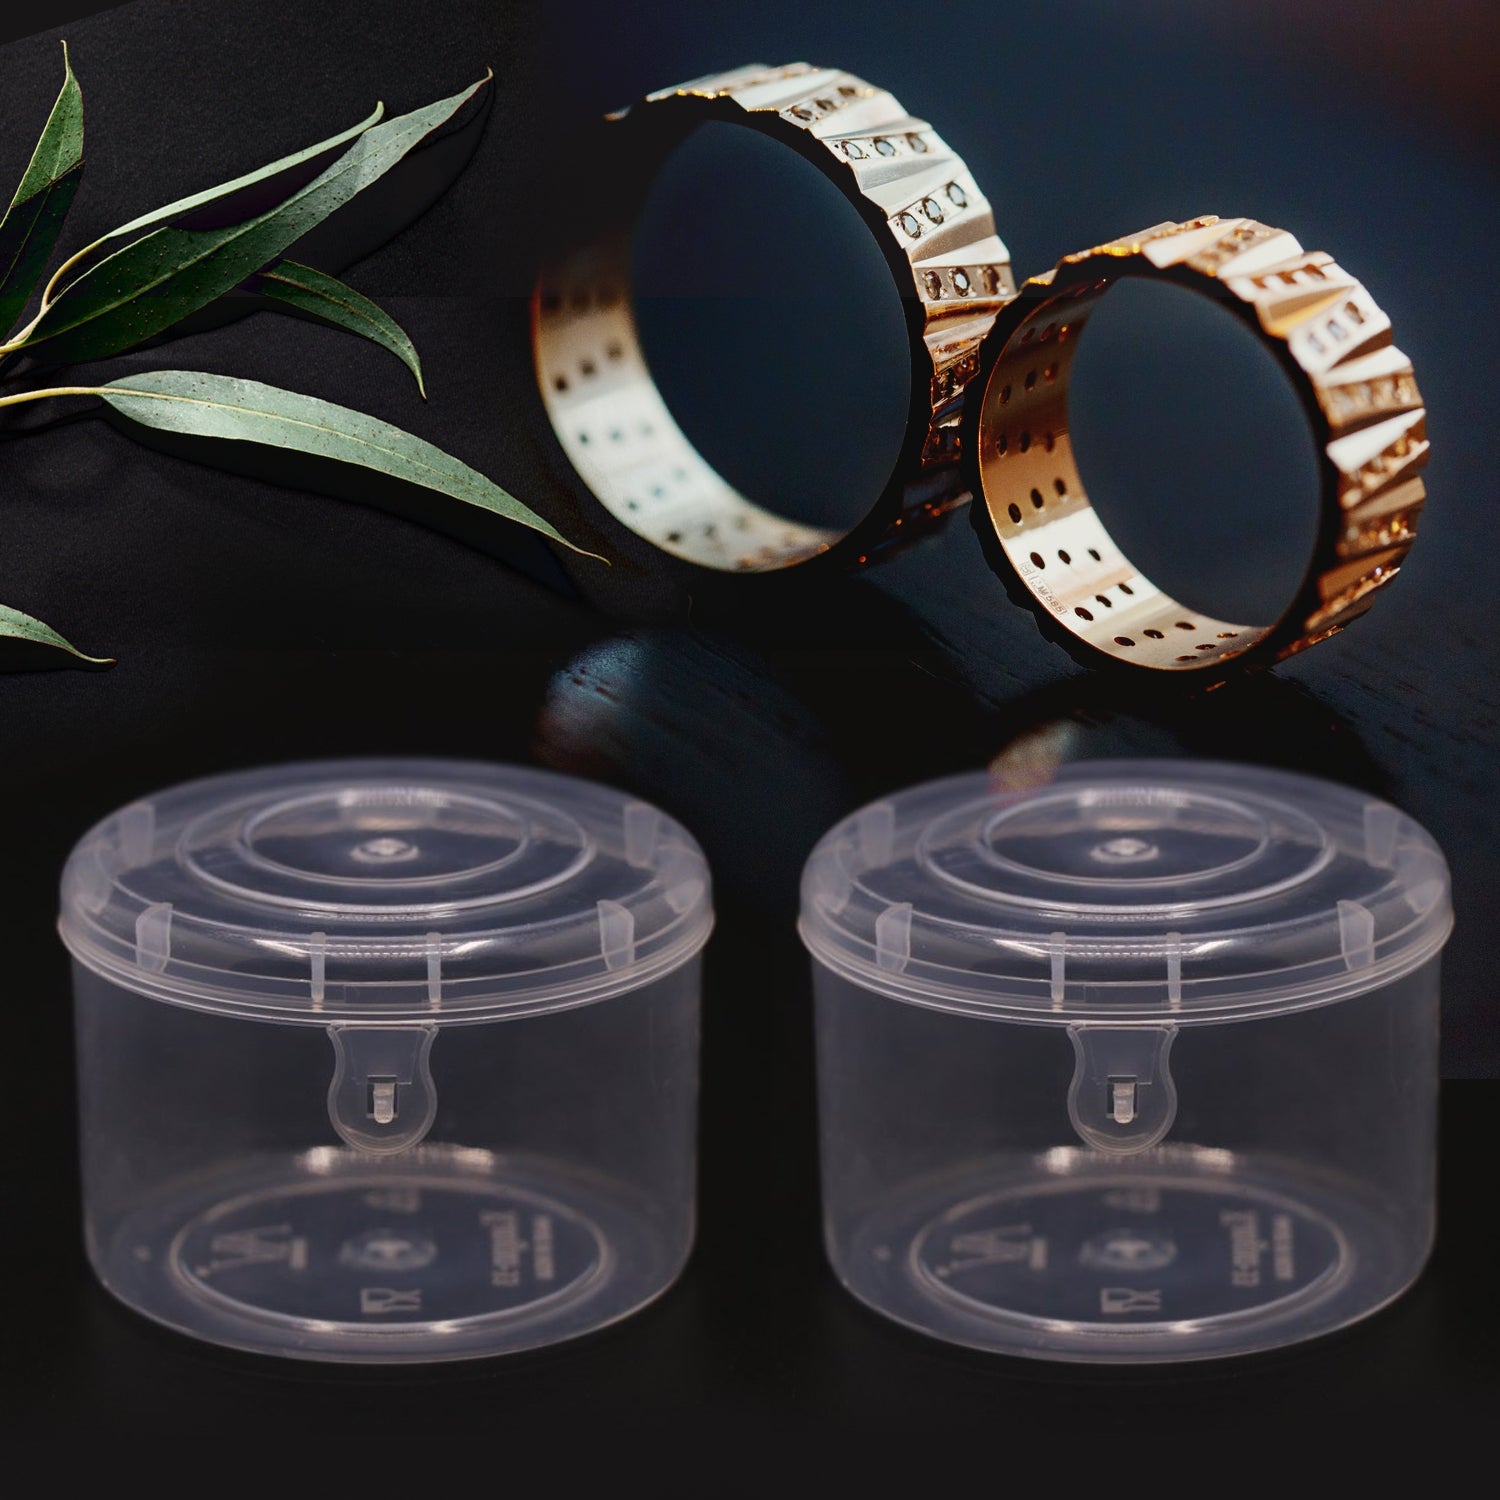 8723 Kangan / Bangle Round Box for women - Pack of 2 bangle boxes for storage - Transparent Plastic storage boxes | Jewelry organizers, Small Plastic Boxes for Storage of Bangles (2 Pc Set)